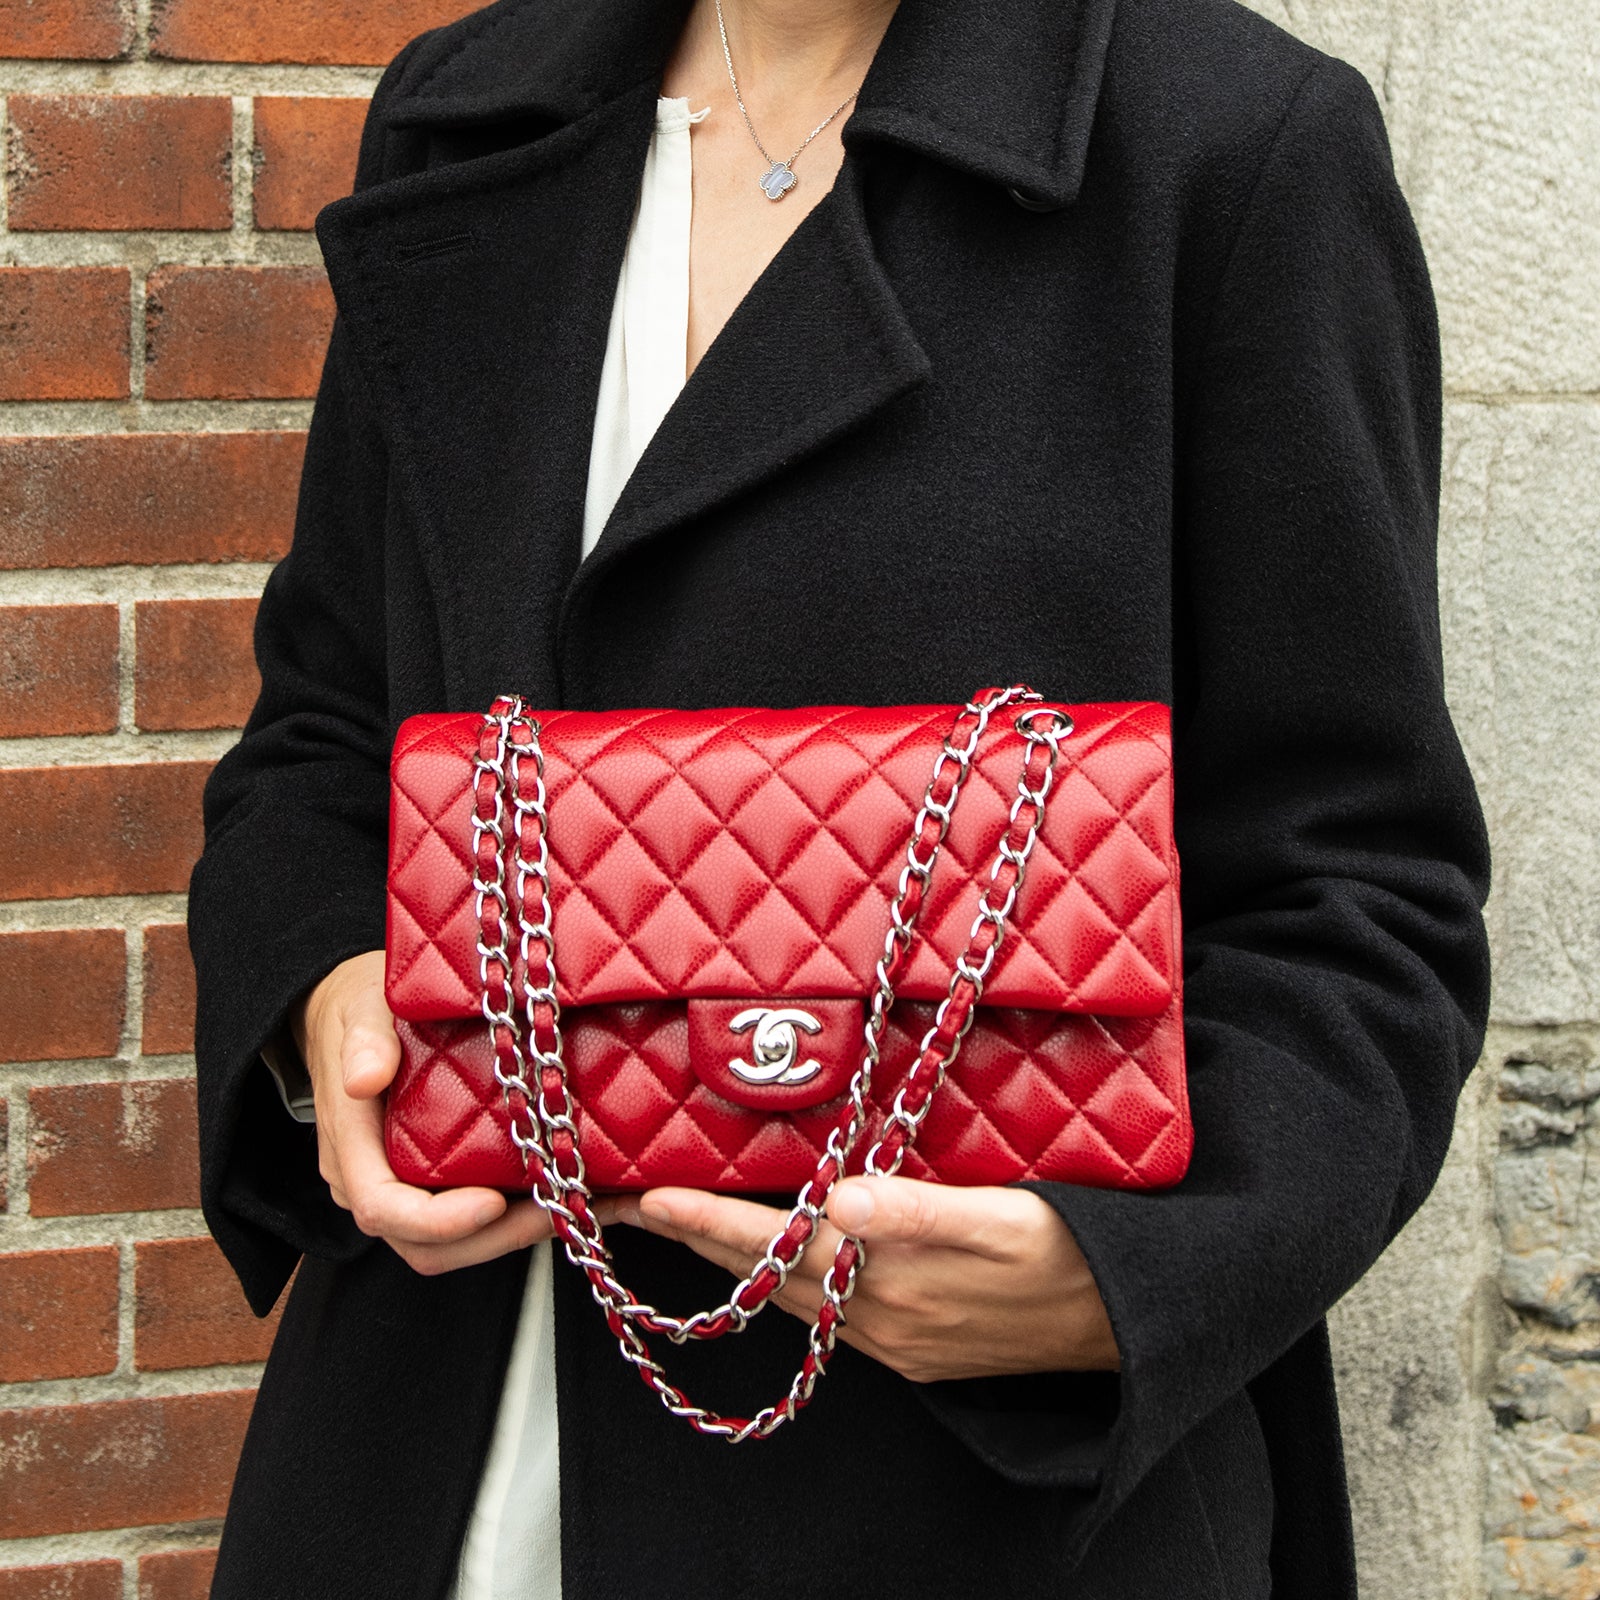 Chanel Red Quilted Caviar Classic Medium Double Flap Bag - Love that Bag etc - Preowned Authentic Designer Handbags & Preloved Fashions